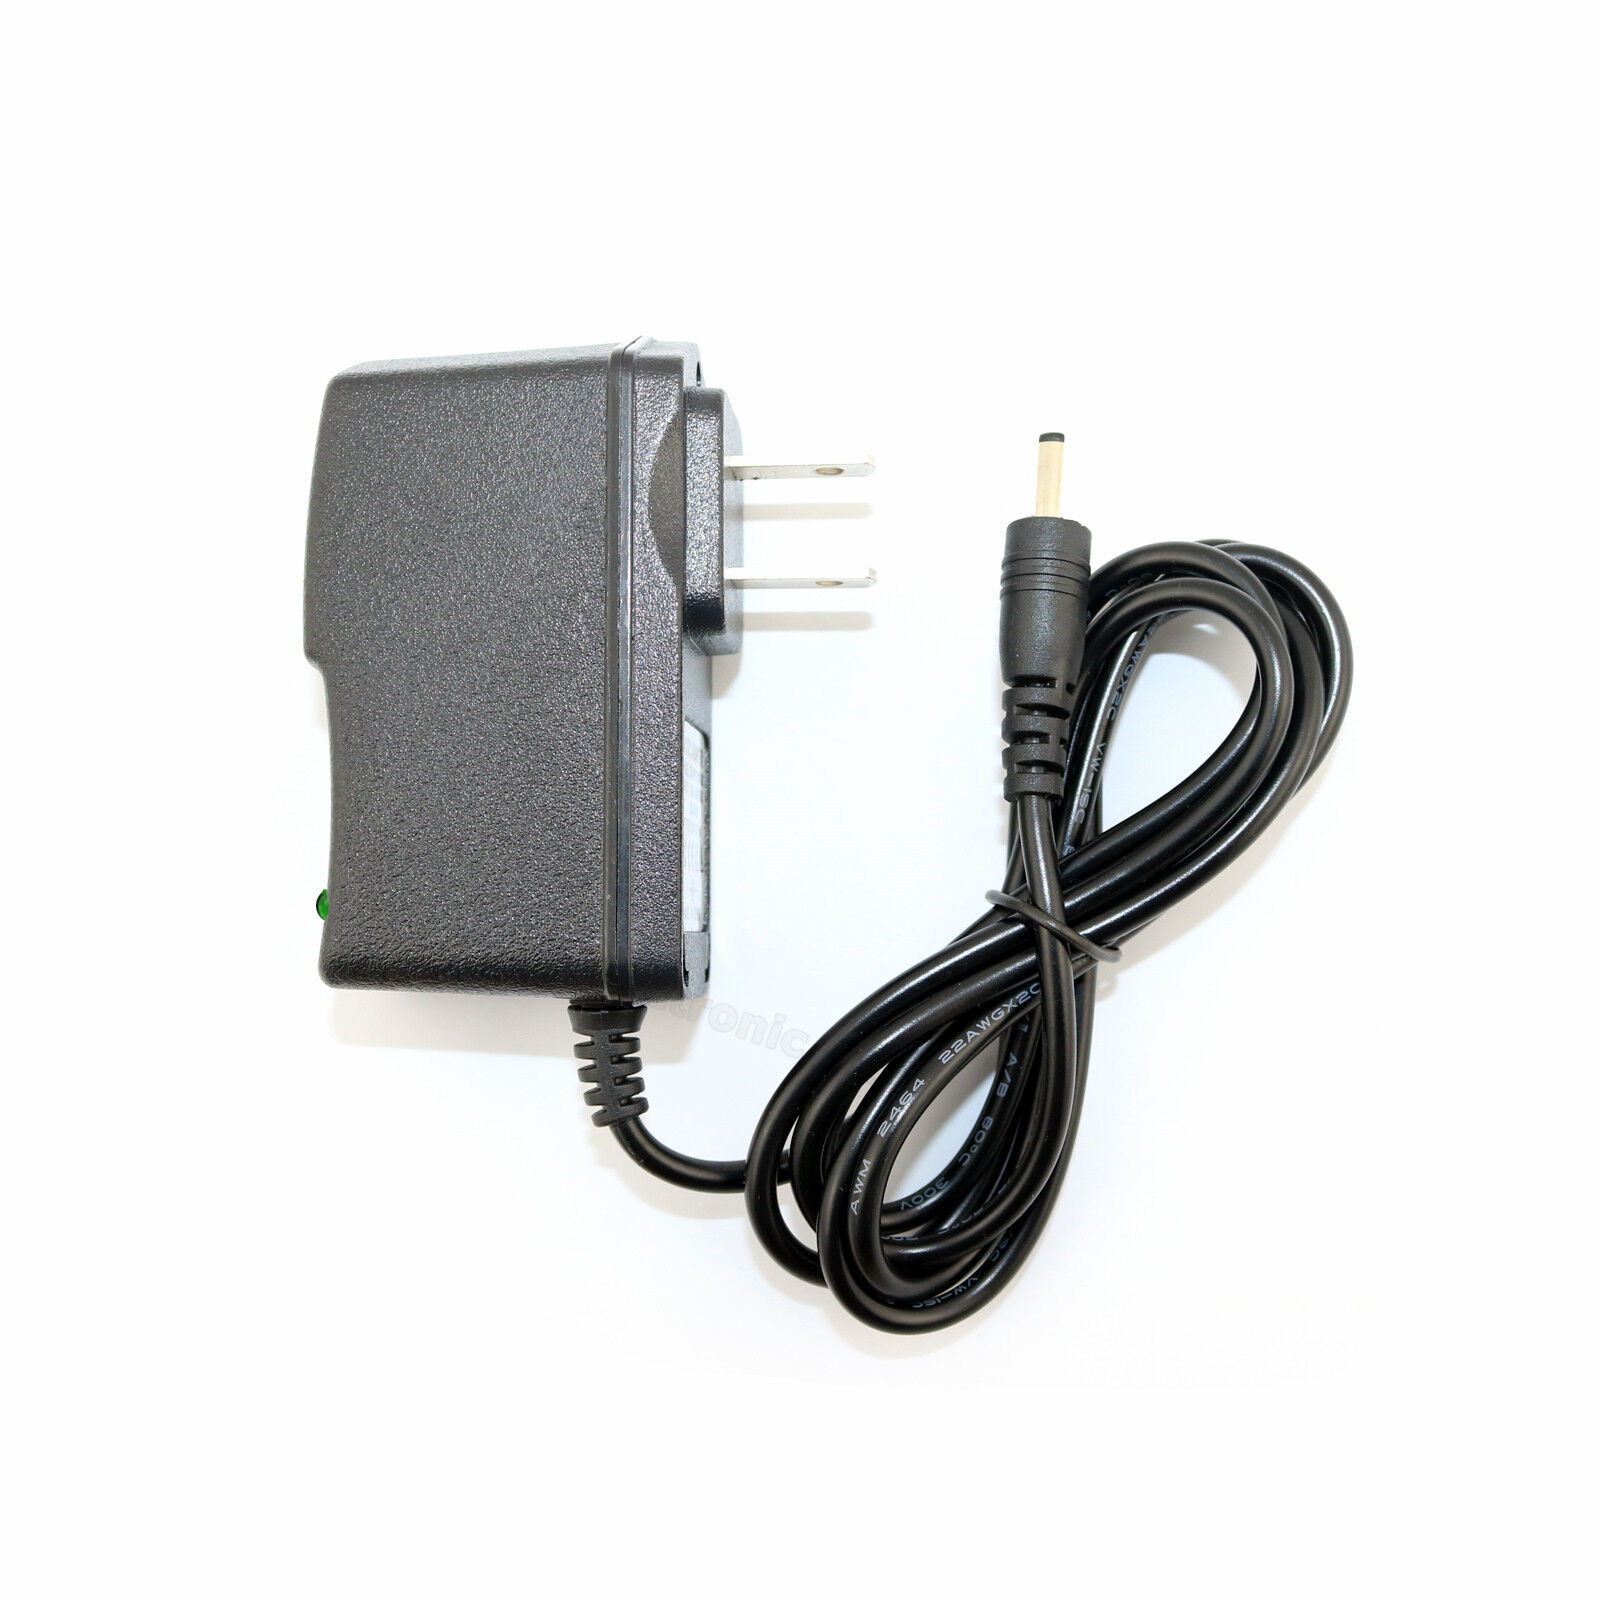 Power Charger AC Adapter 5V 2A (2000mA) 2.5mm x 0.7mm Power Supply Cord New Power Charger AC Adapter 5V 2A (2000mA) 2. - Click Image to Close